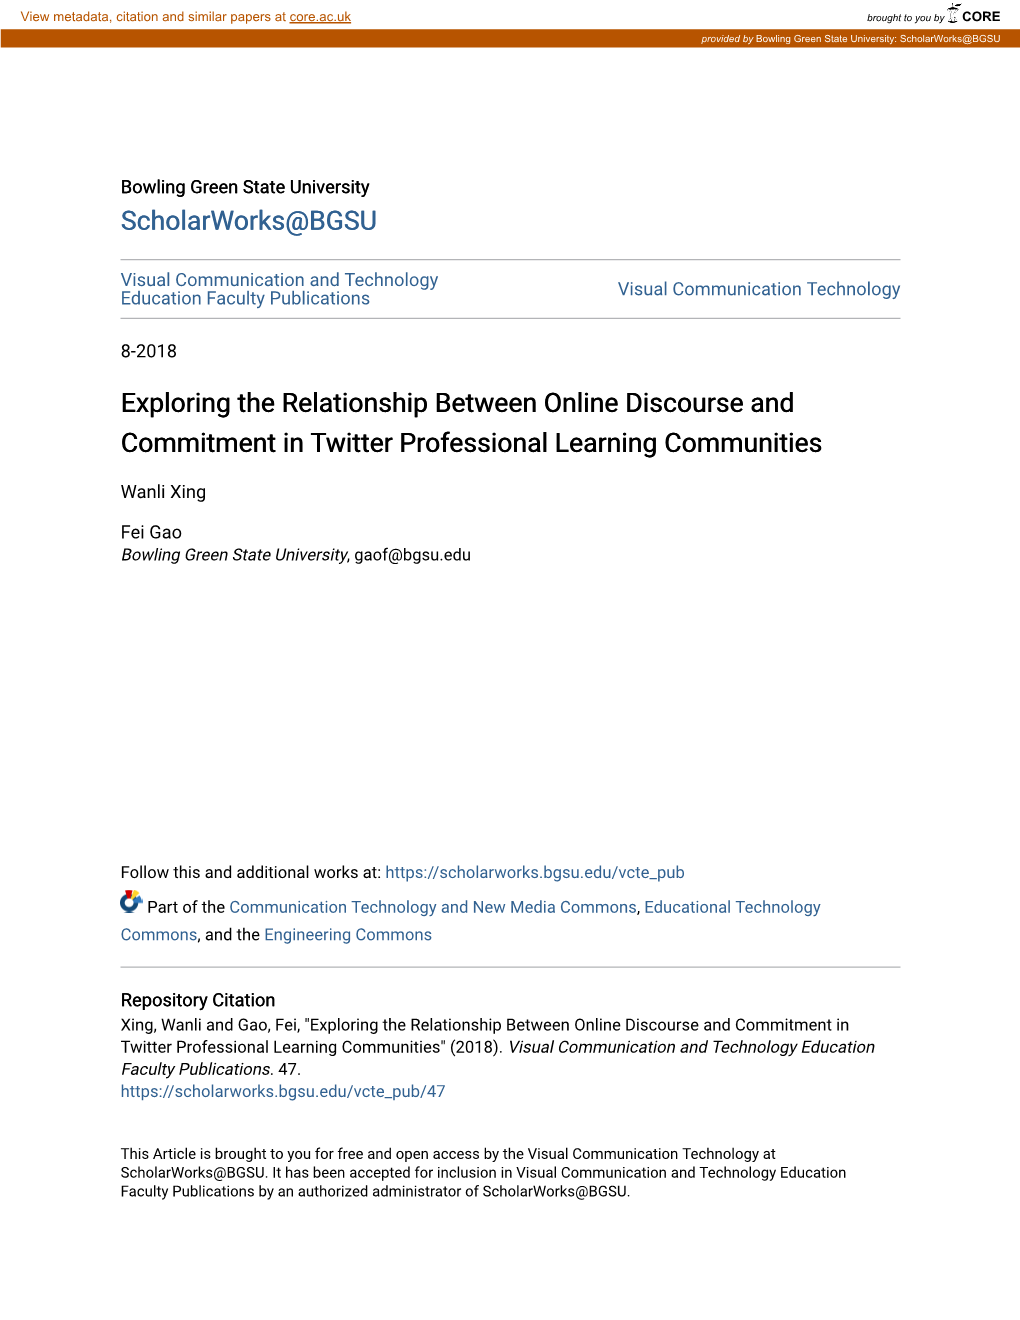 Exploring the Relationship Between Online Discourse and Commitment in Twitter Professional Learning Communities